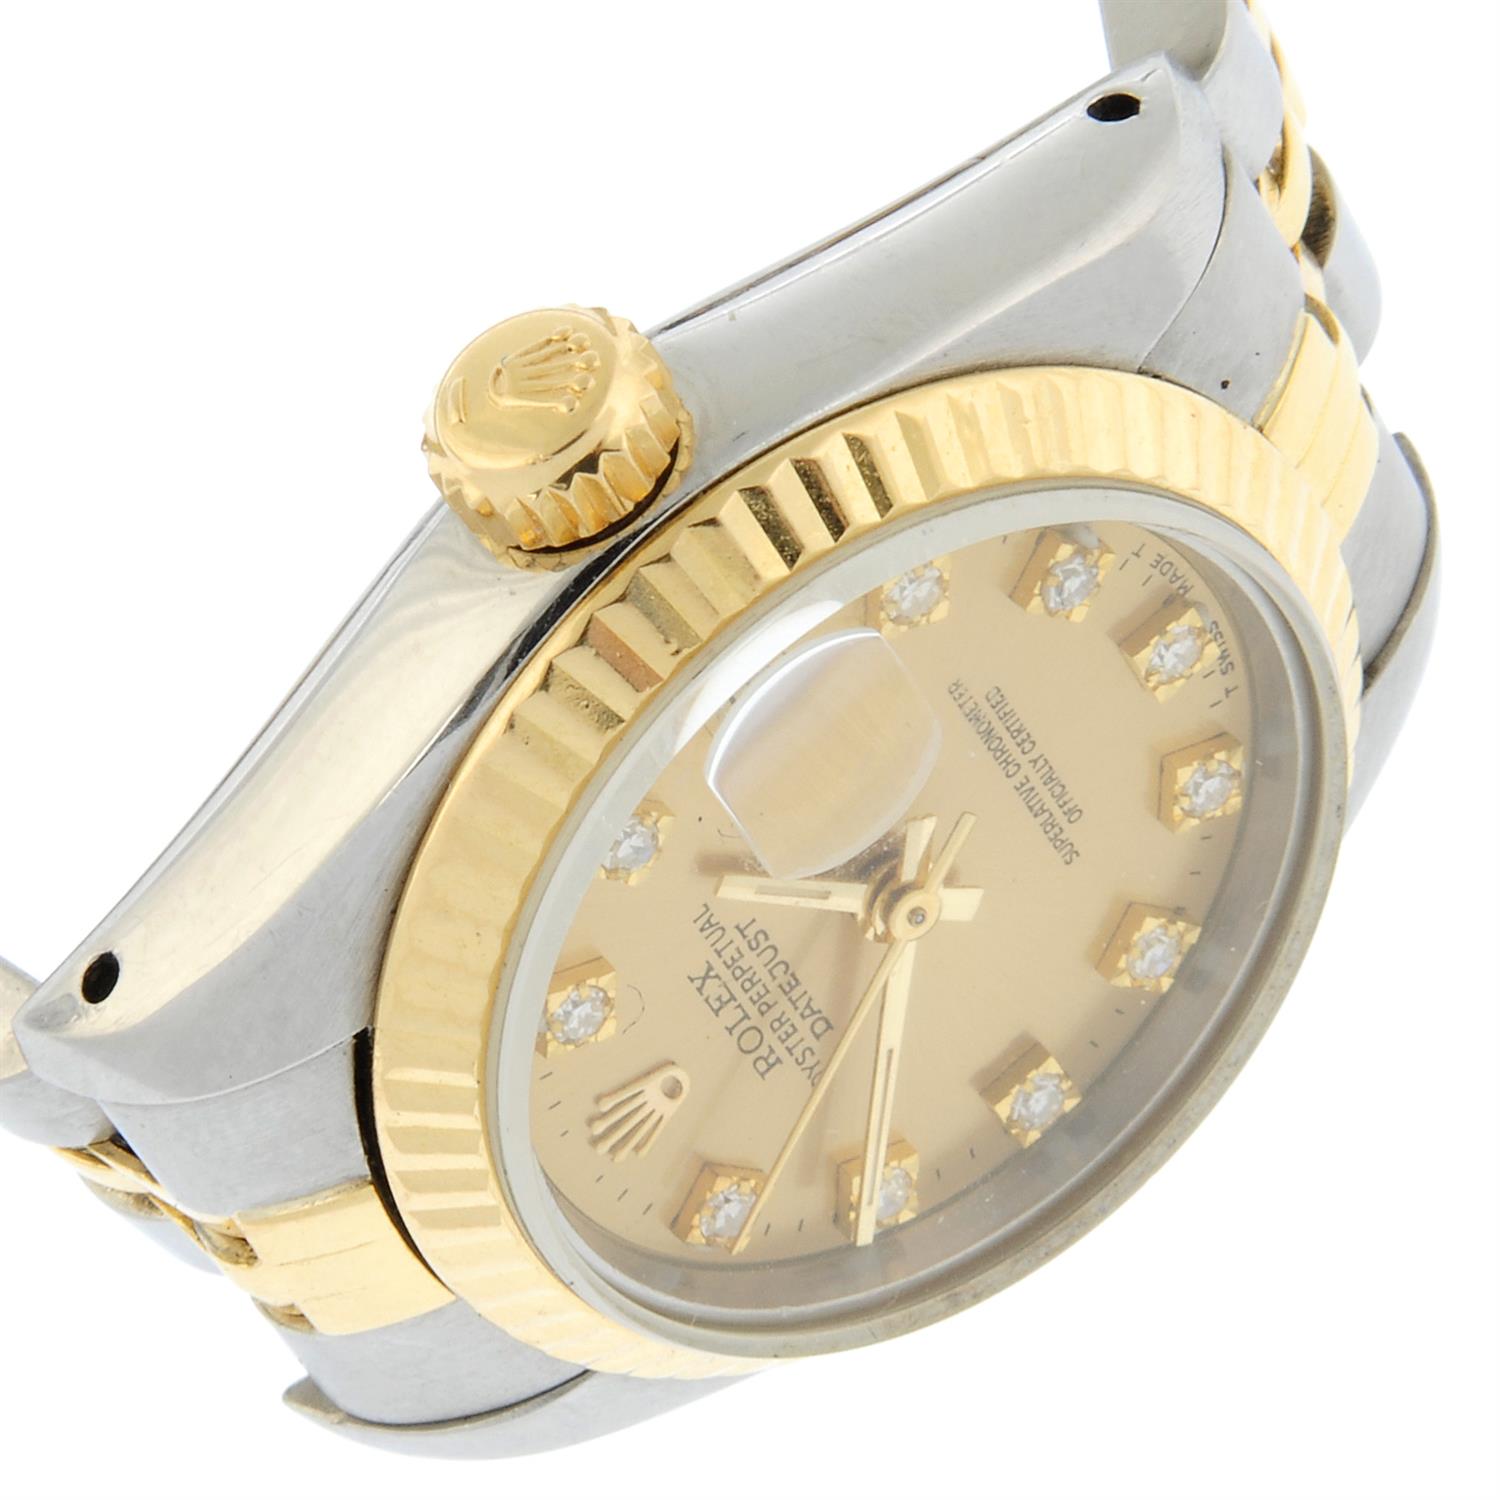 Rolex - an Oyster Perpetual Datejust watch, 26mm. - Image 3 of 4